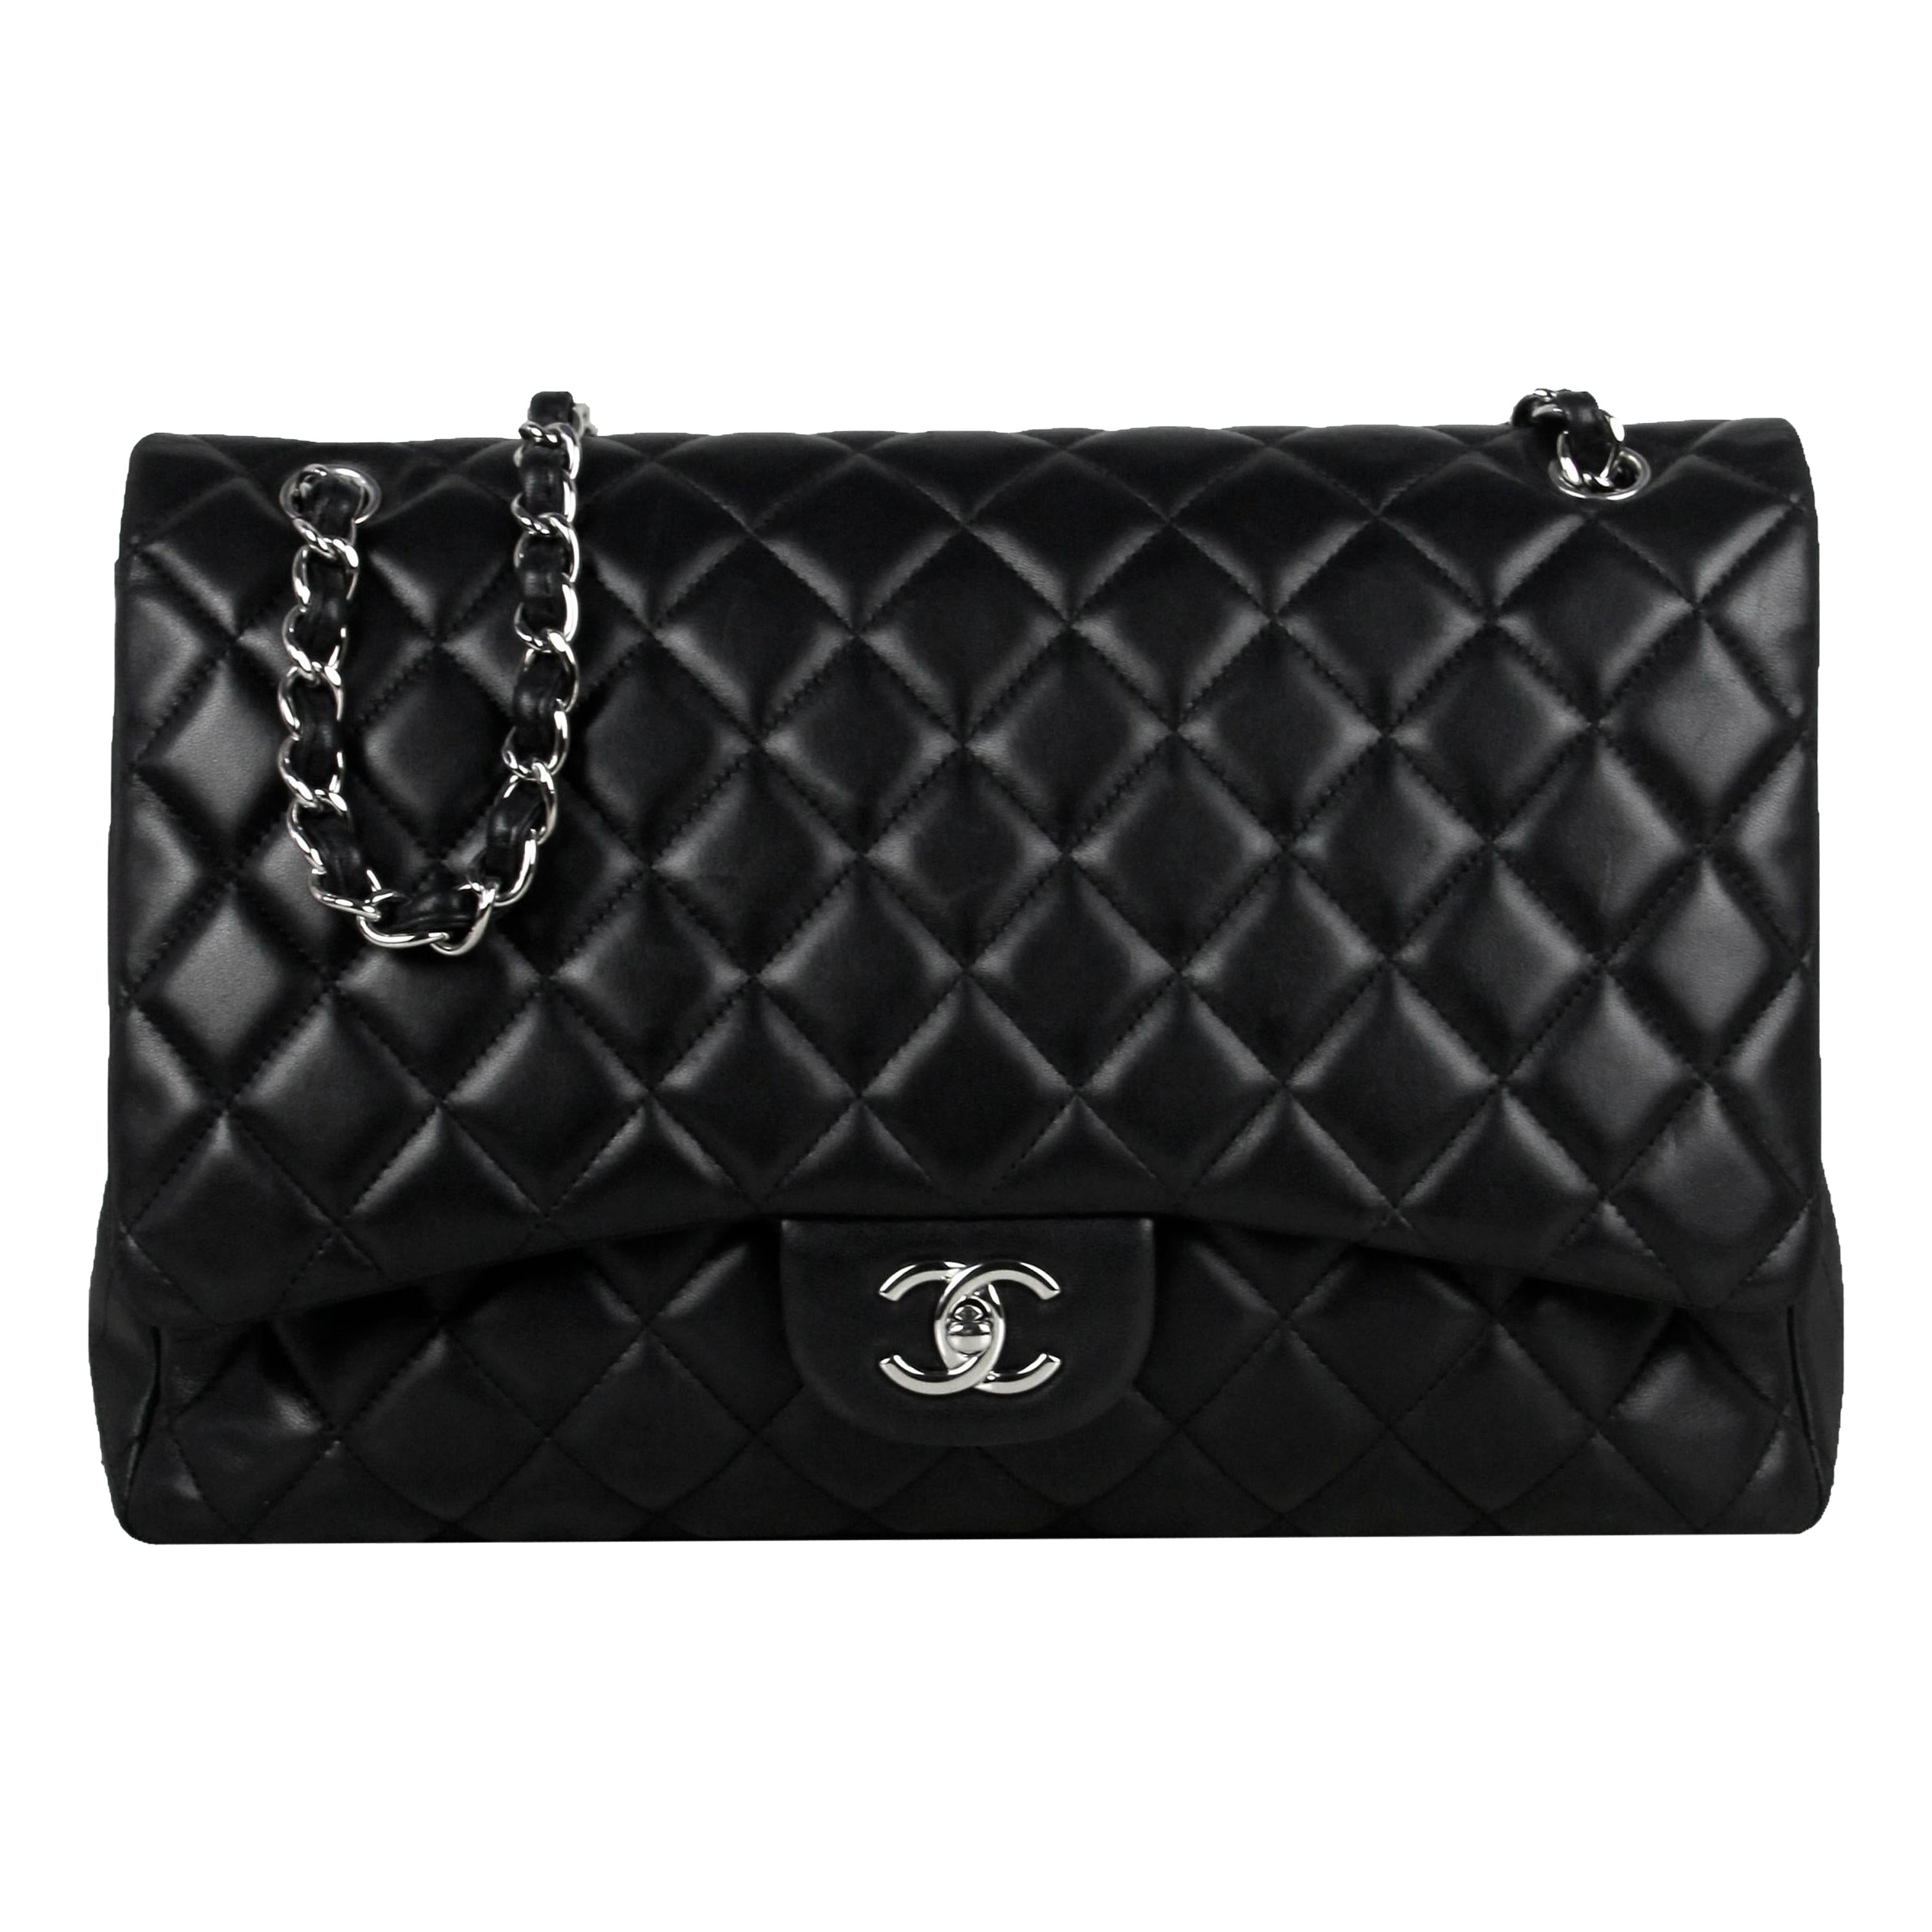 Chanel Black Lambskin Leather Quilted Single Flap Maxi Bag For Sale